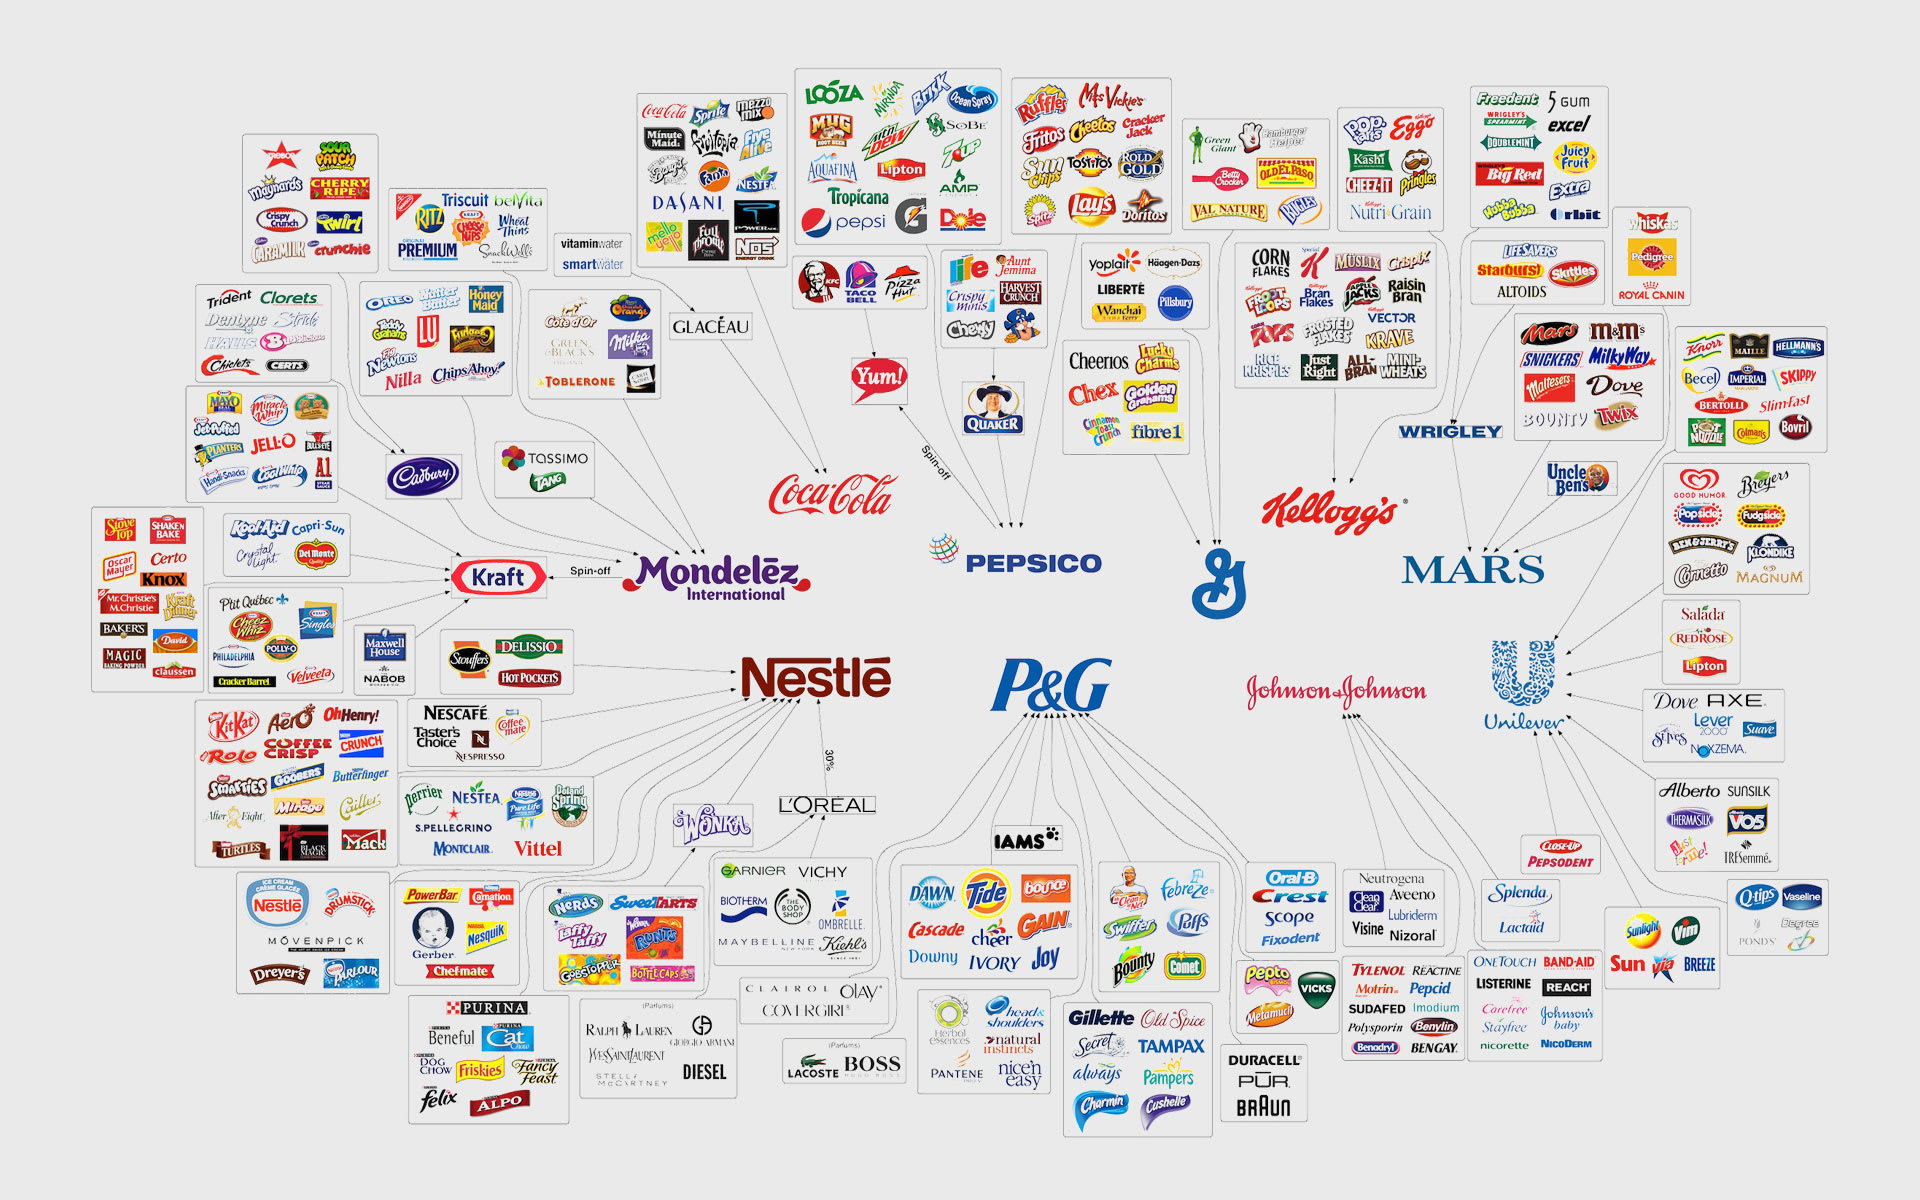 10 companies control almost every large food and beverage brand in